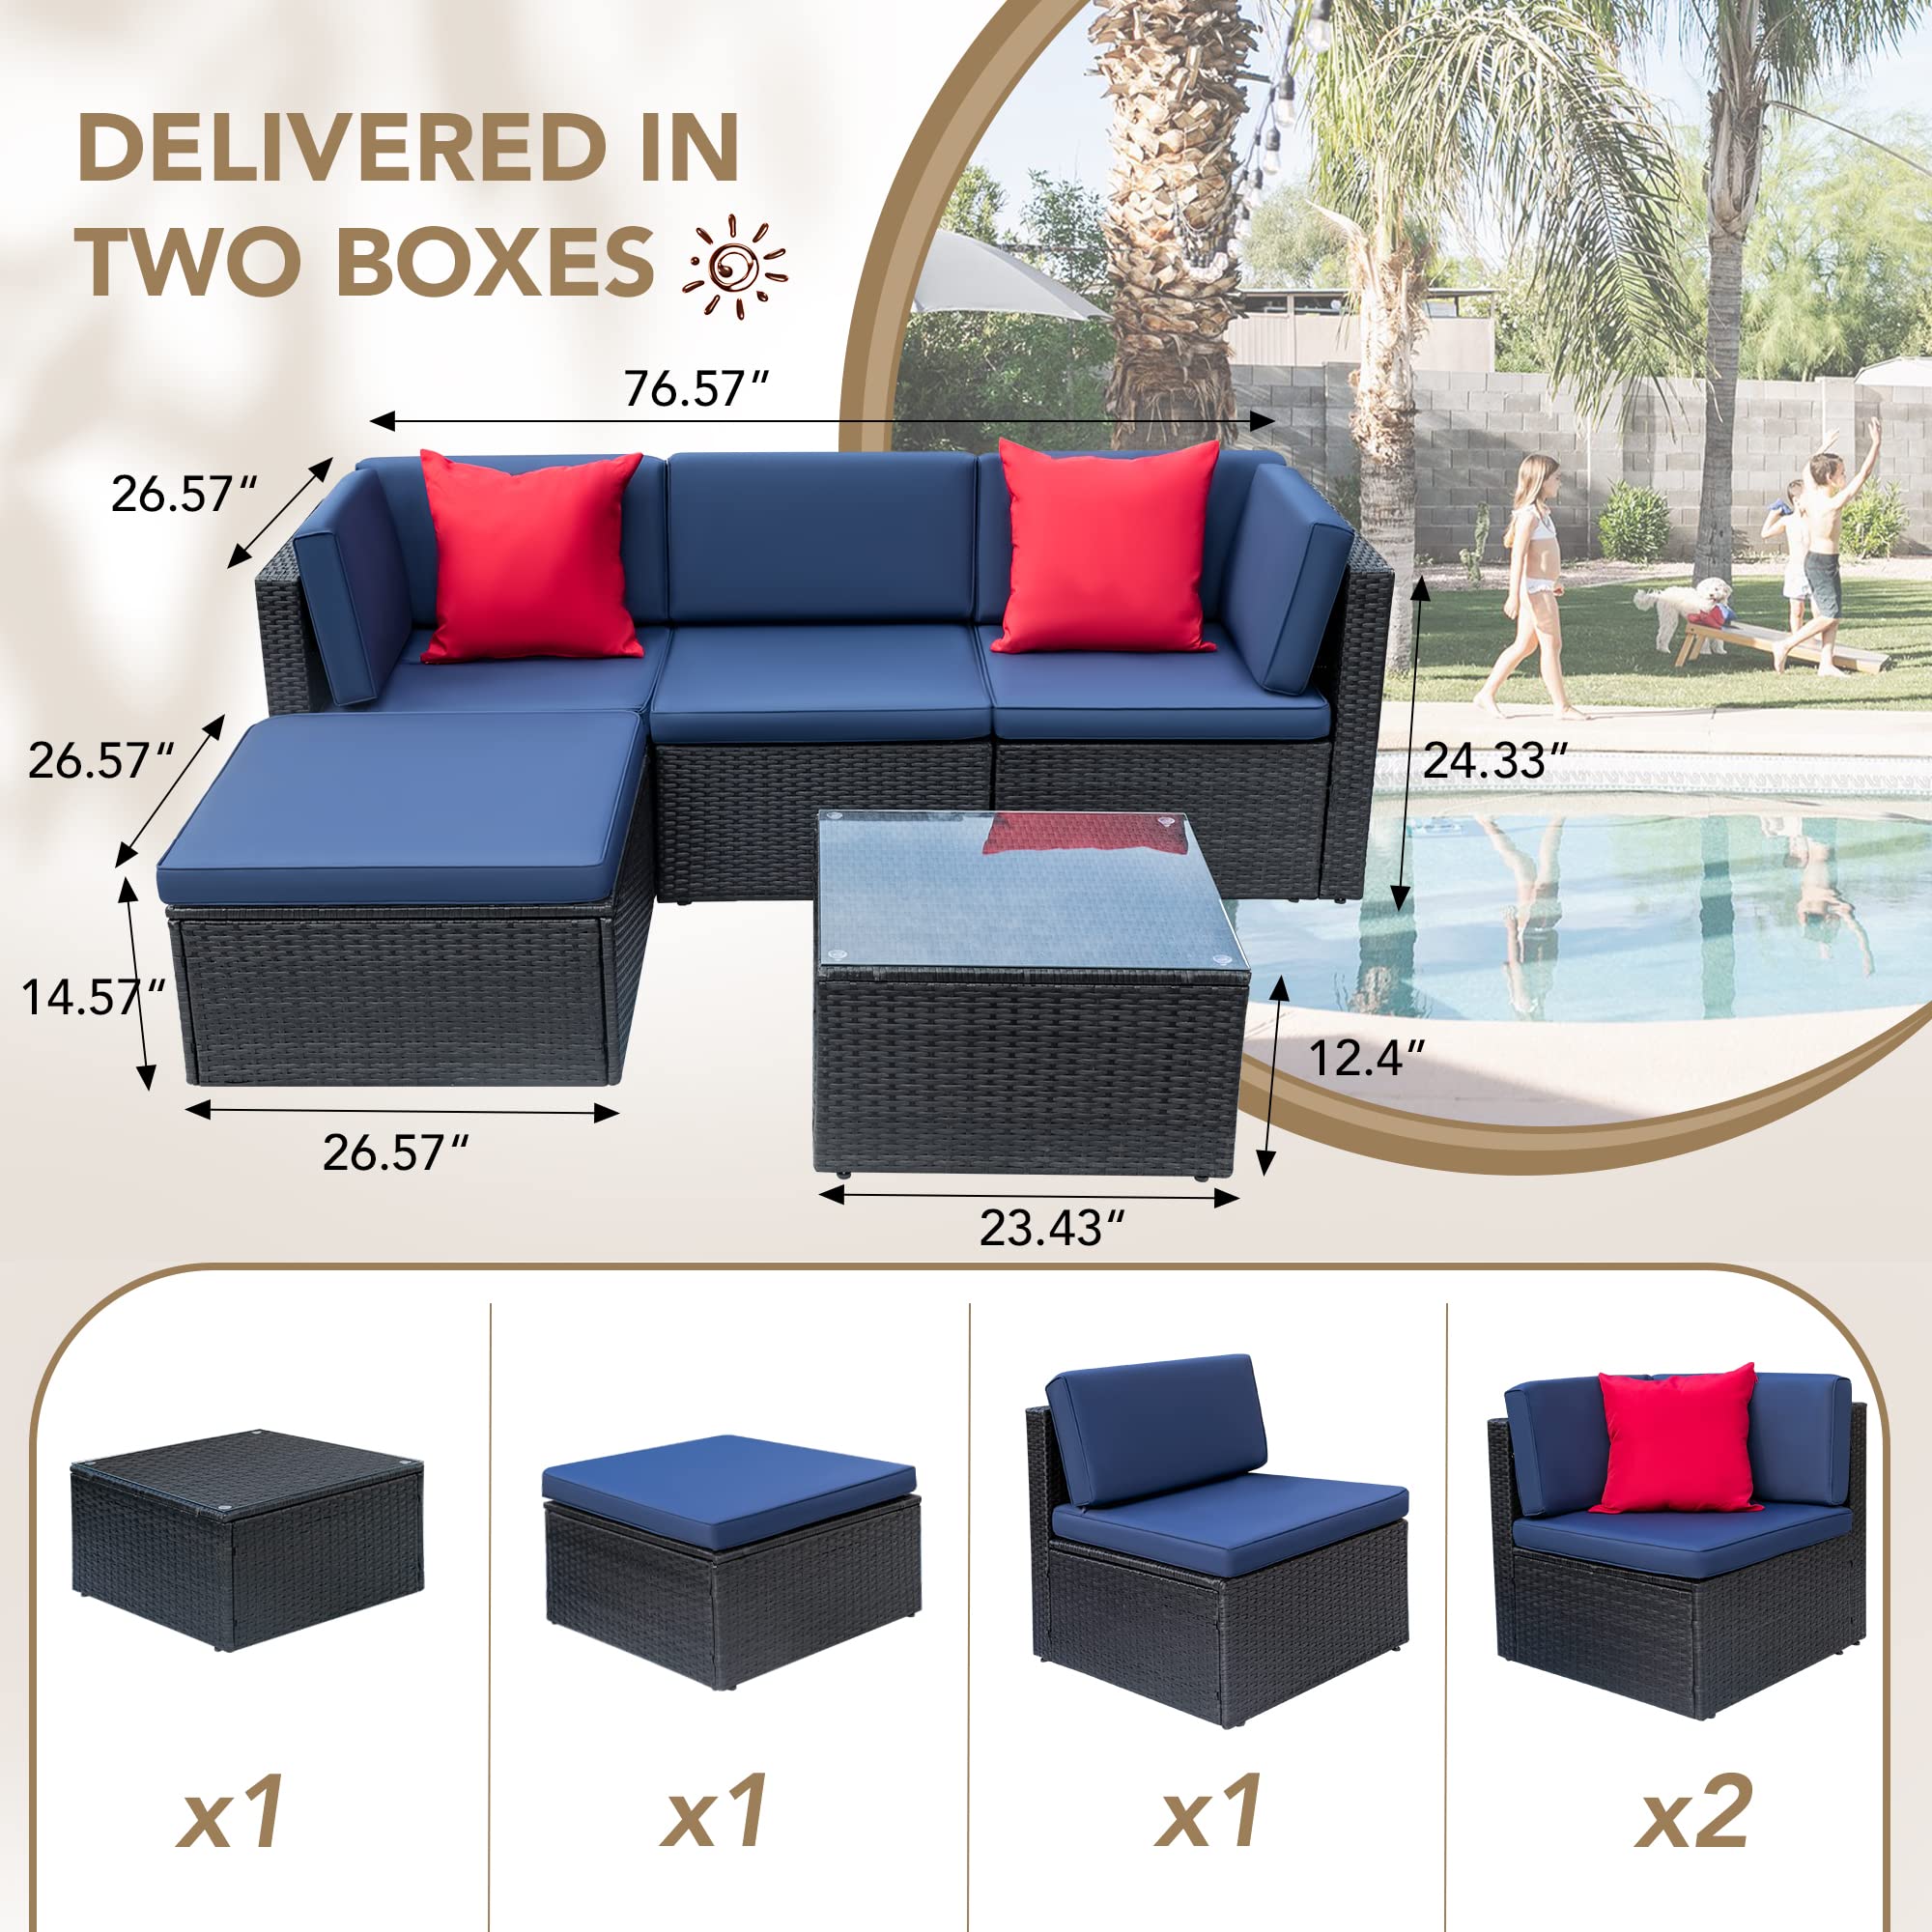 Devoko 5 Pieces Patio Furniture Sets All Weathevr Outdoor Sectional Patio Sofa Manual Weaving Wicker Rattan Patio Seating Sofas with Cushion and Glass Table (Navy Blue)